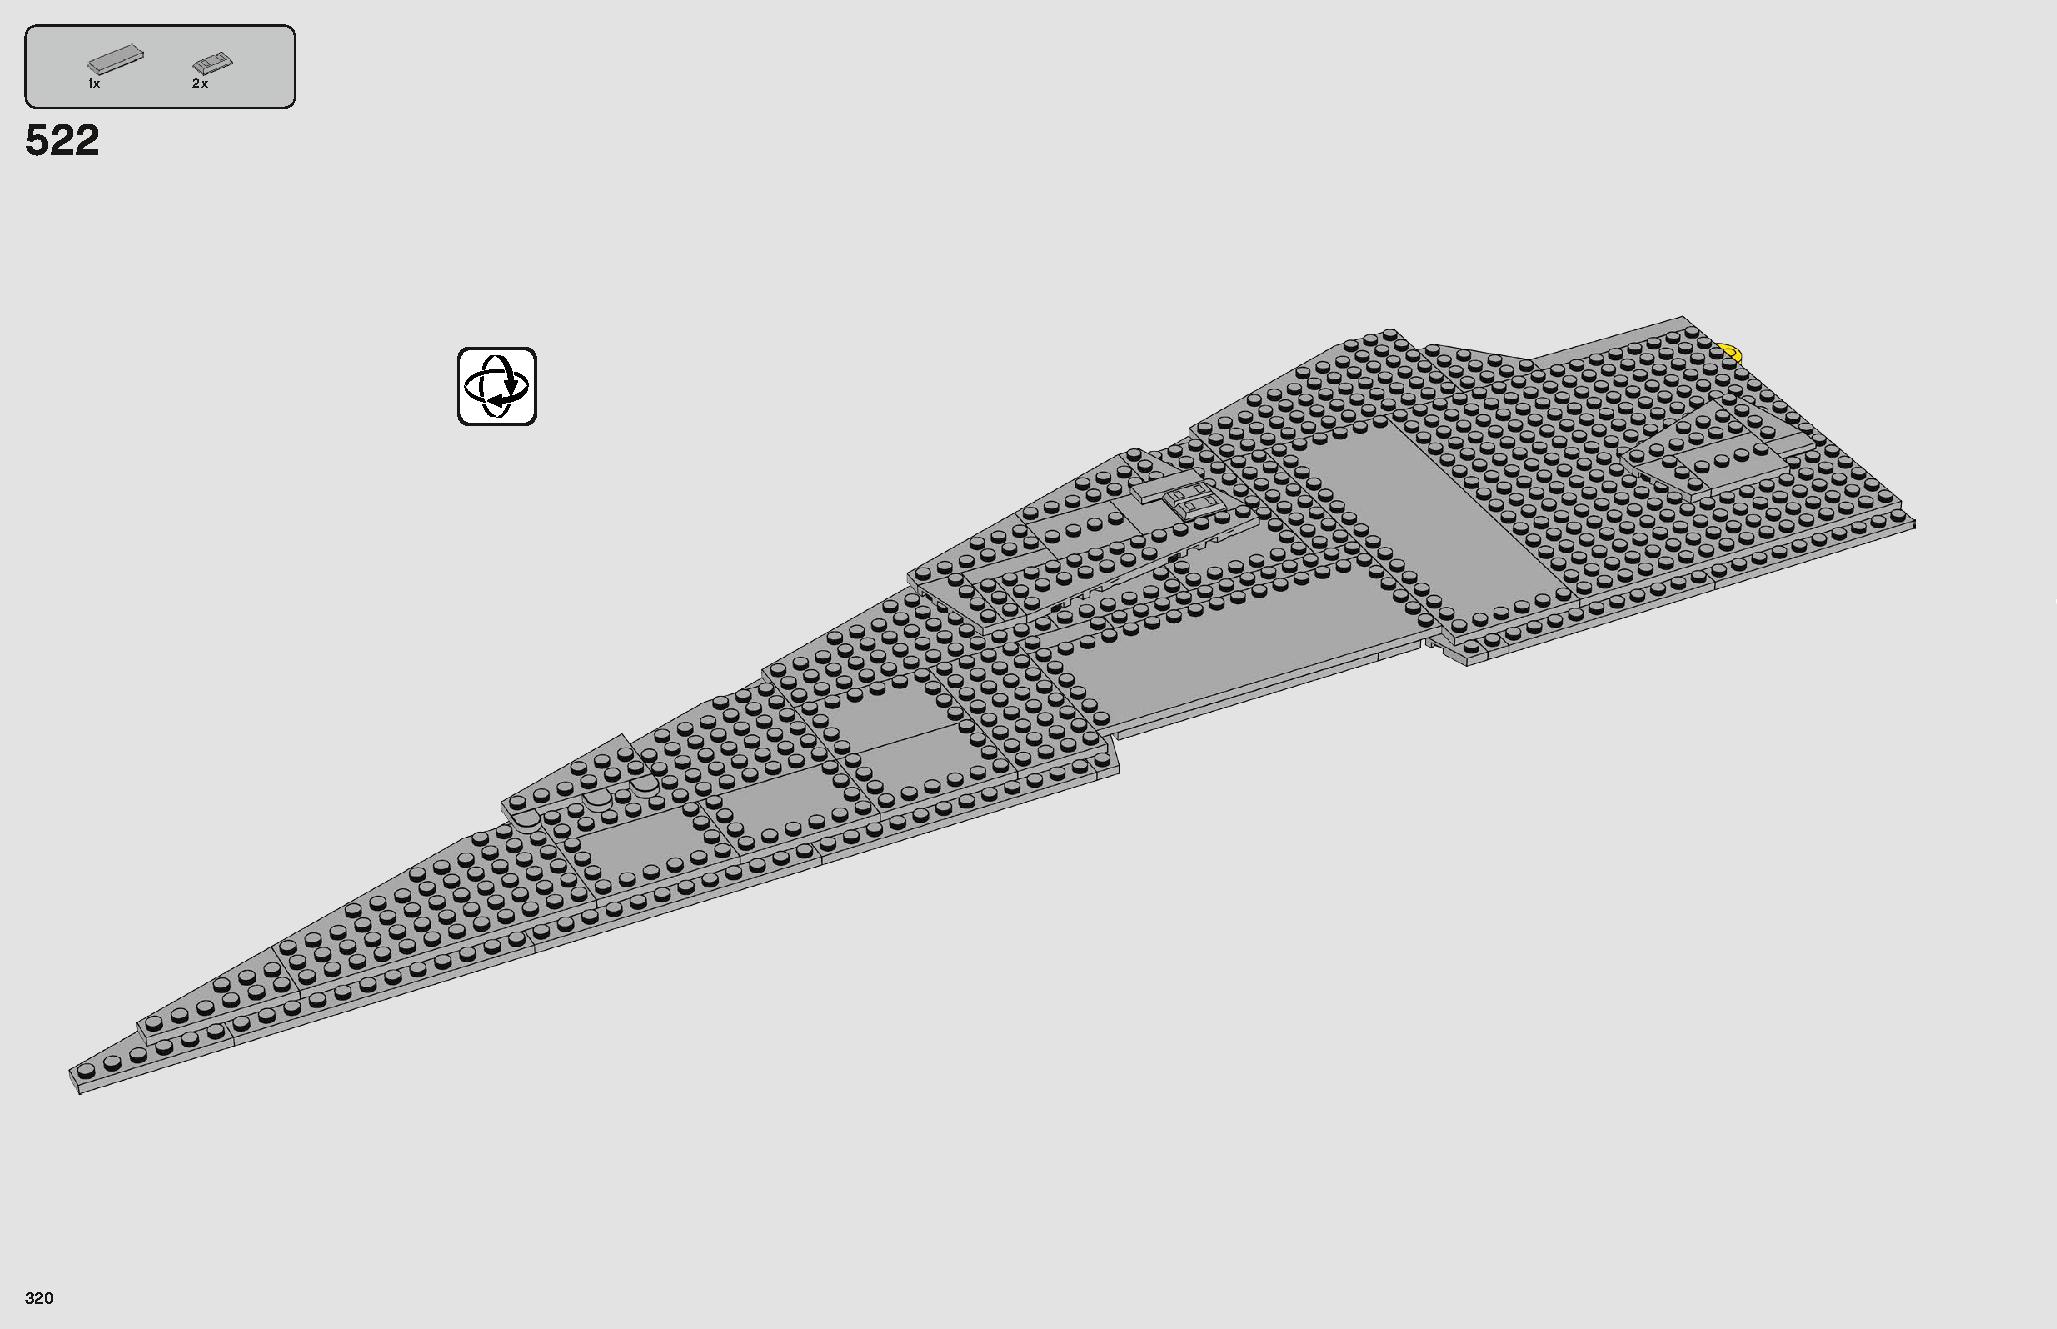 Imperial Star Destroyer 75252 LEGO information LEGO instructions 320 page